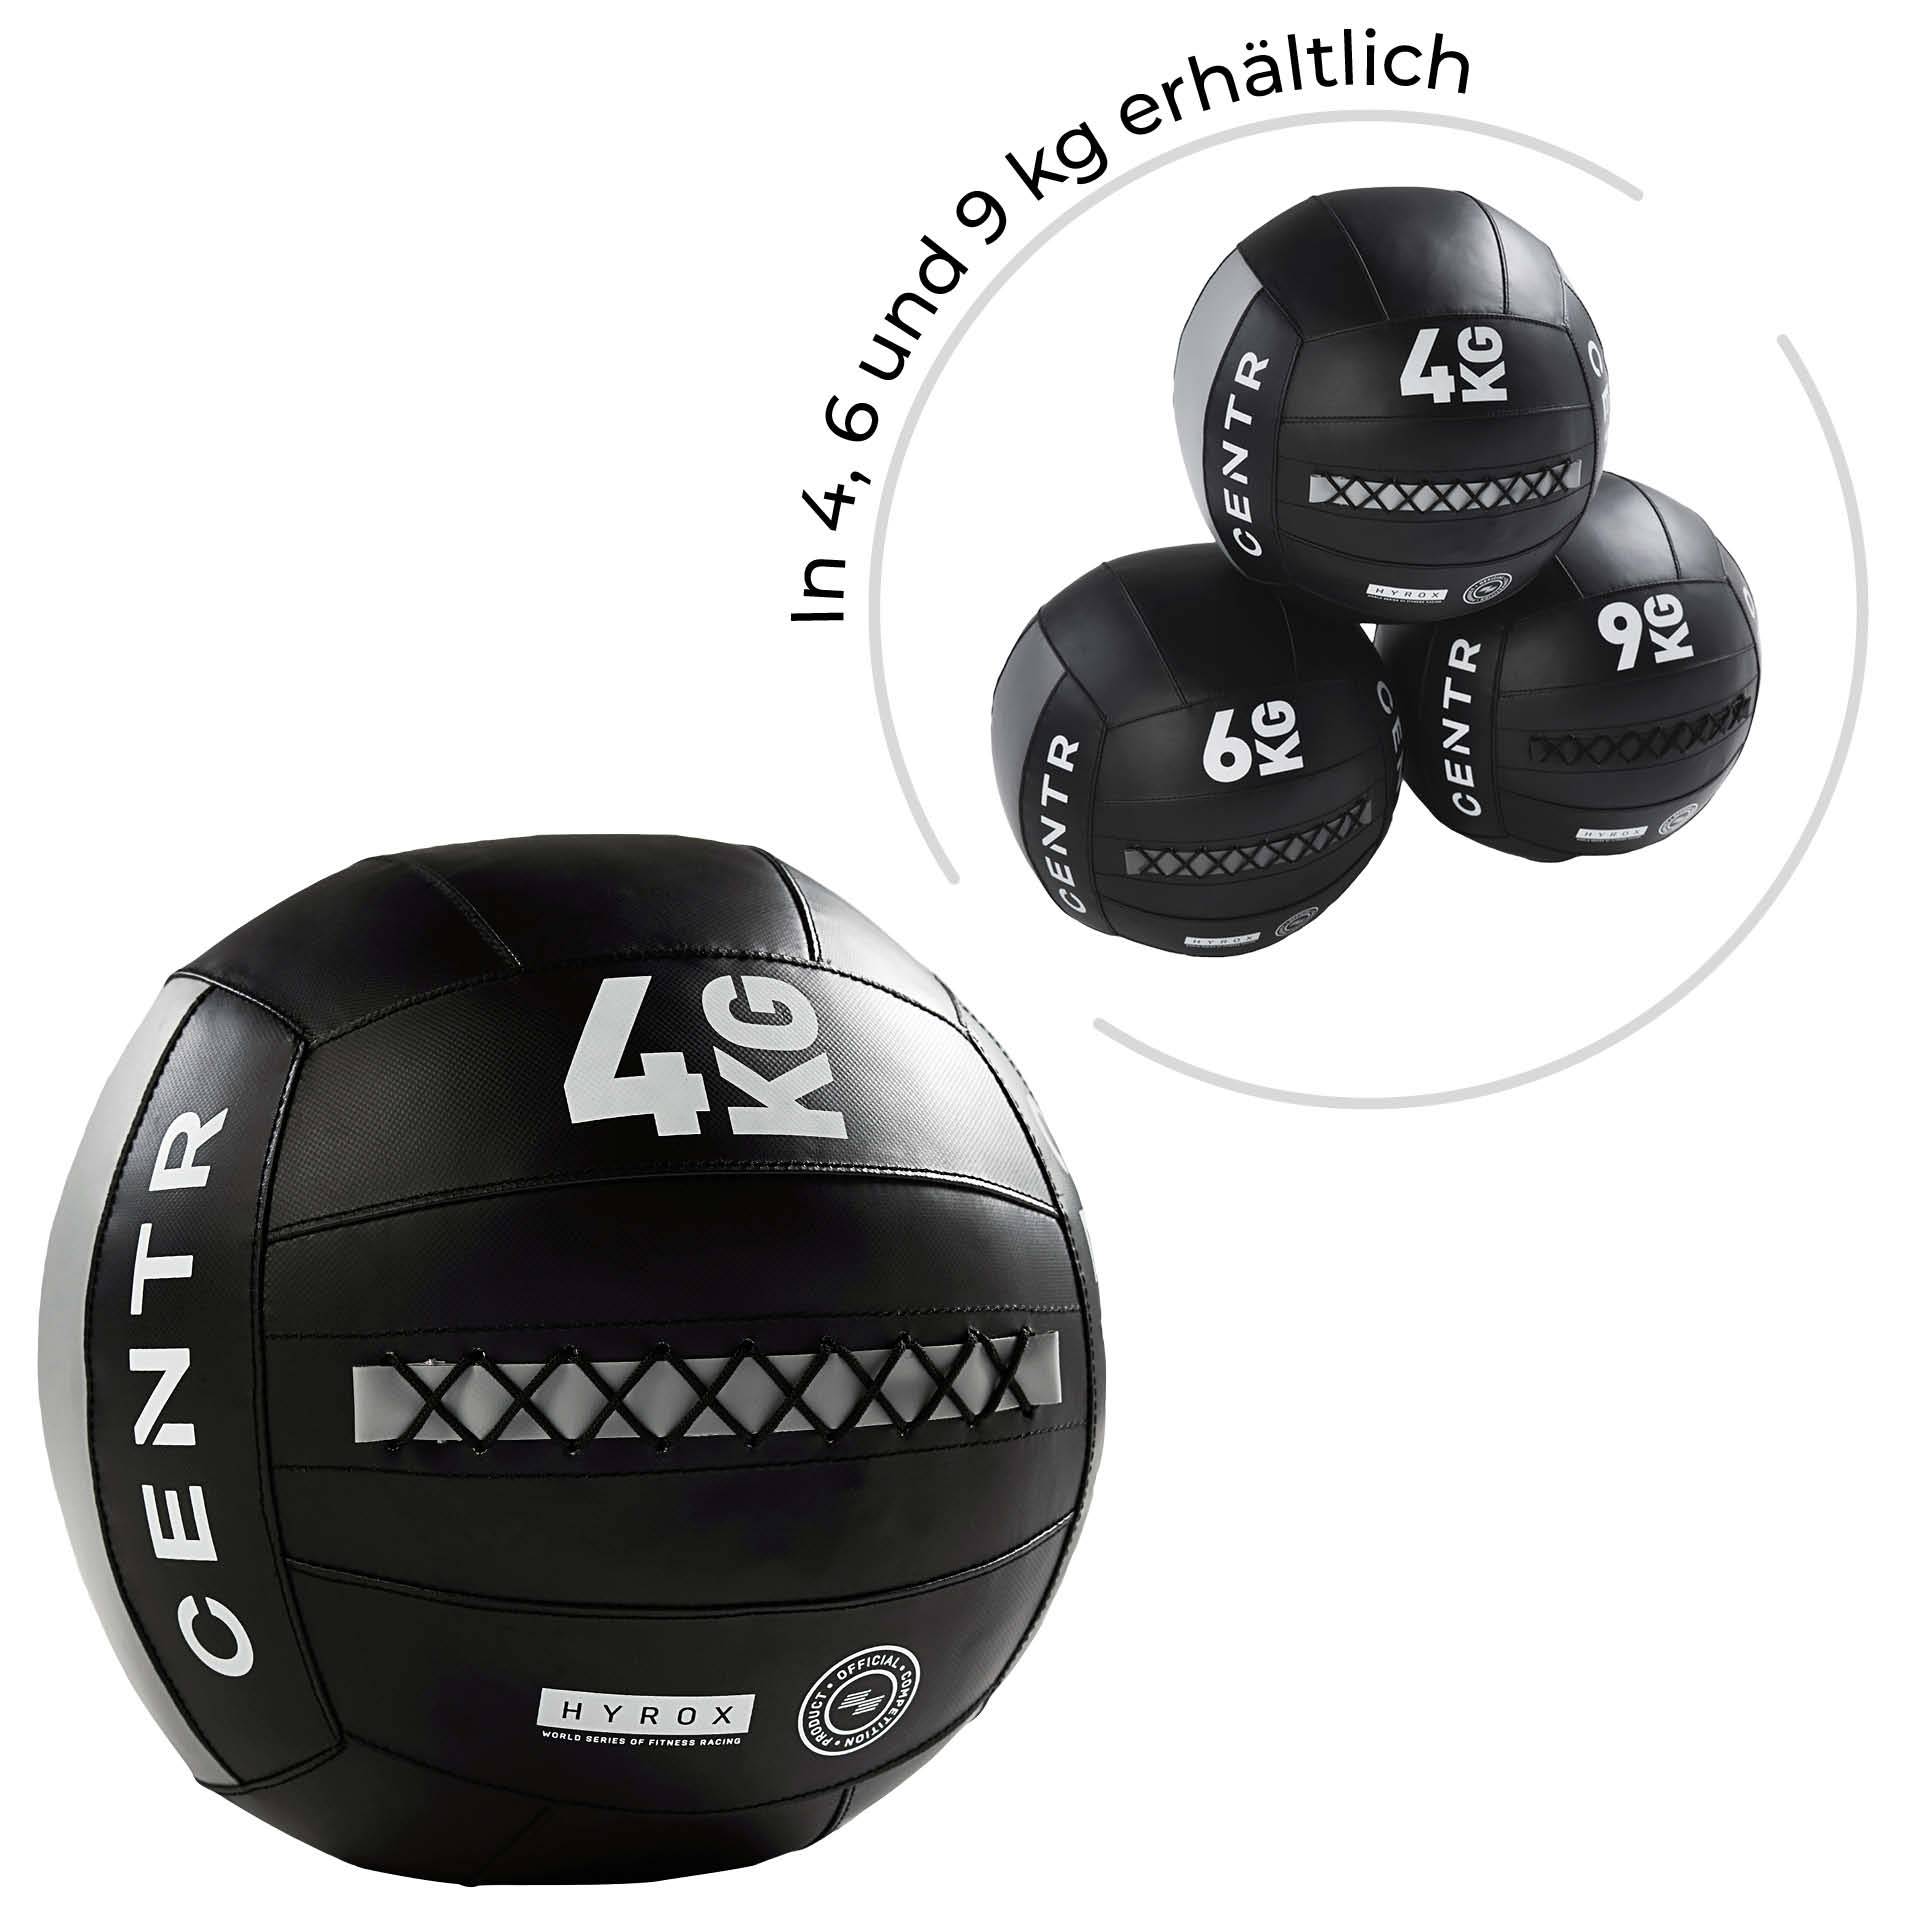 CENTR x HYROX Competition Wall Ball - 4 kg von Perform Better